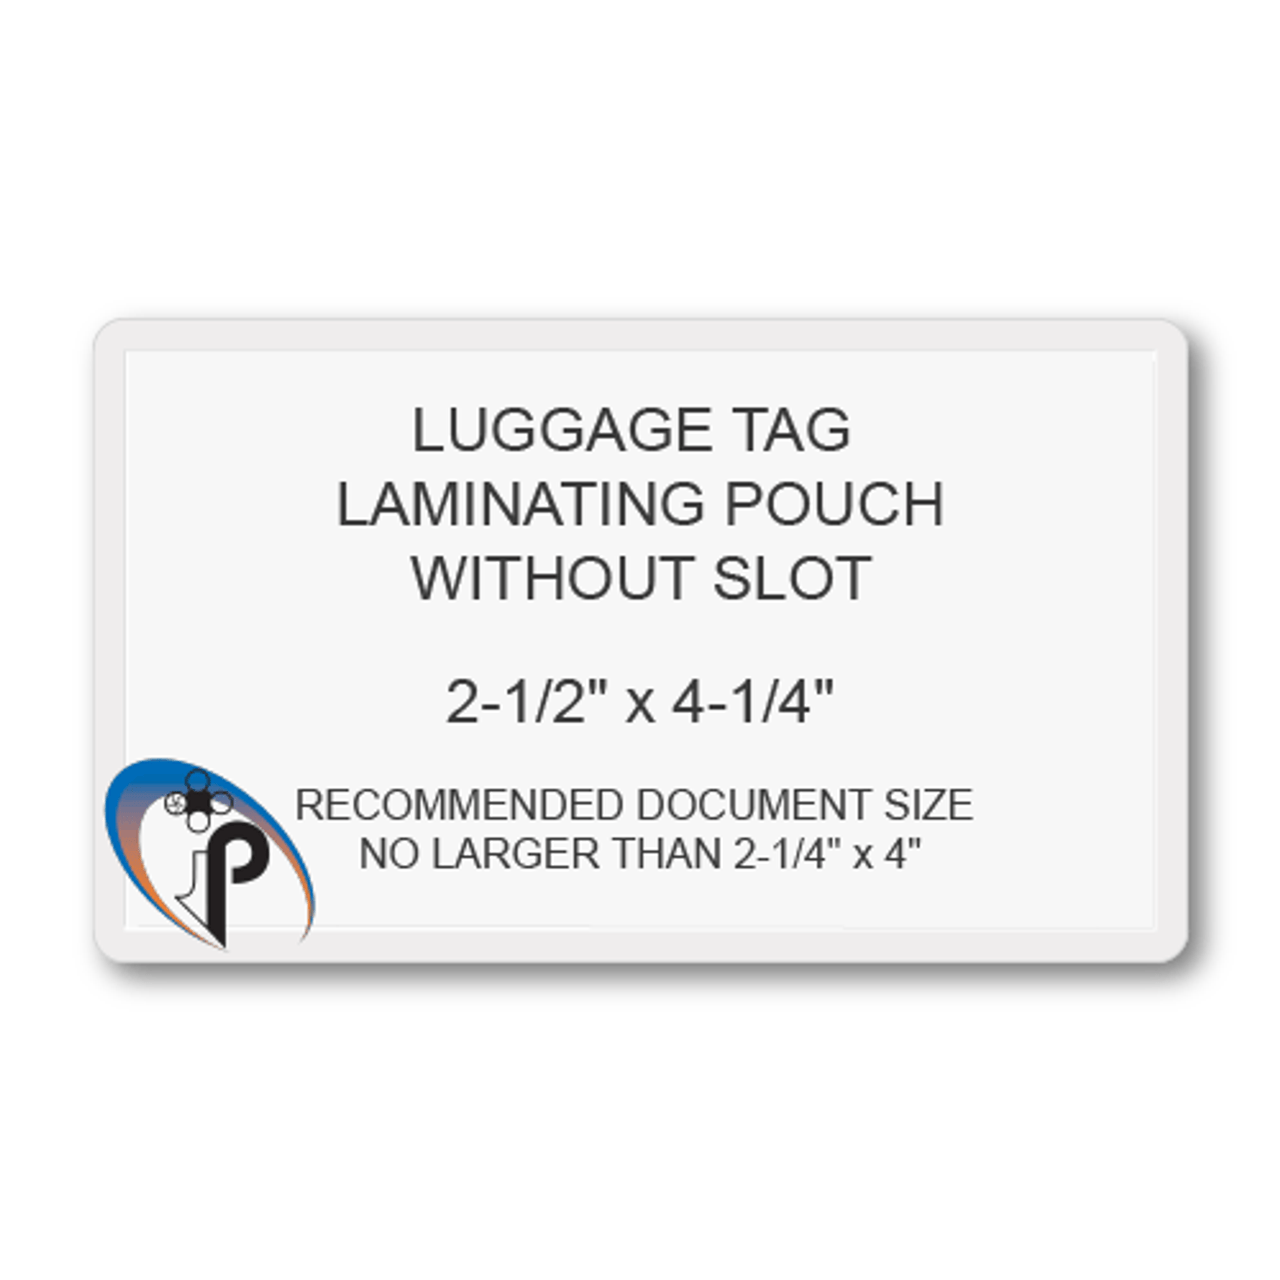 luggage-tag-laminating-pouch-without-slot-5-mil